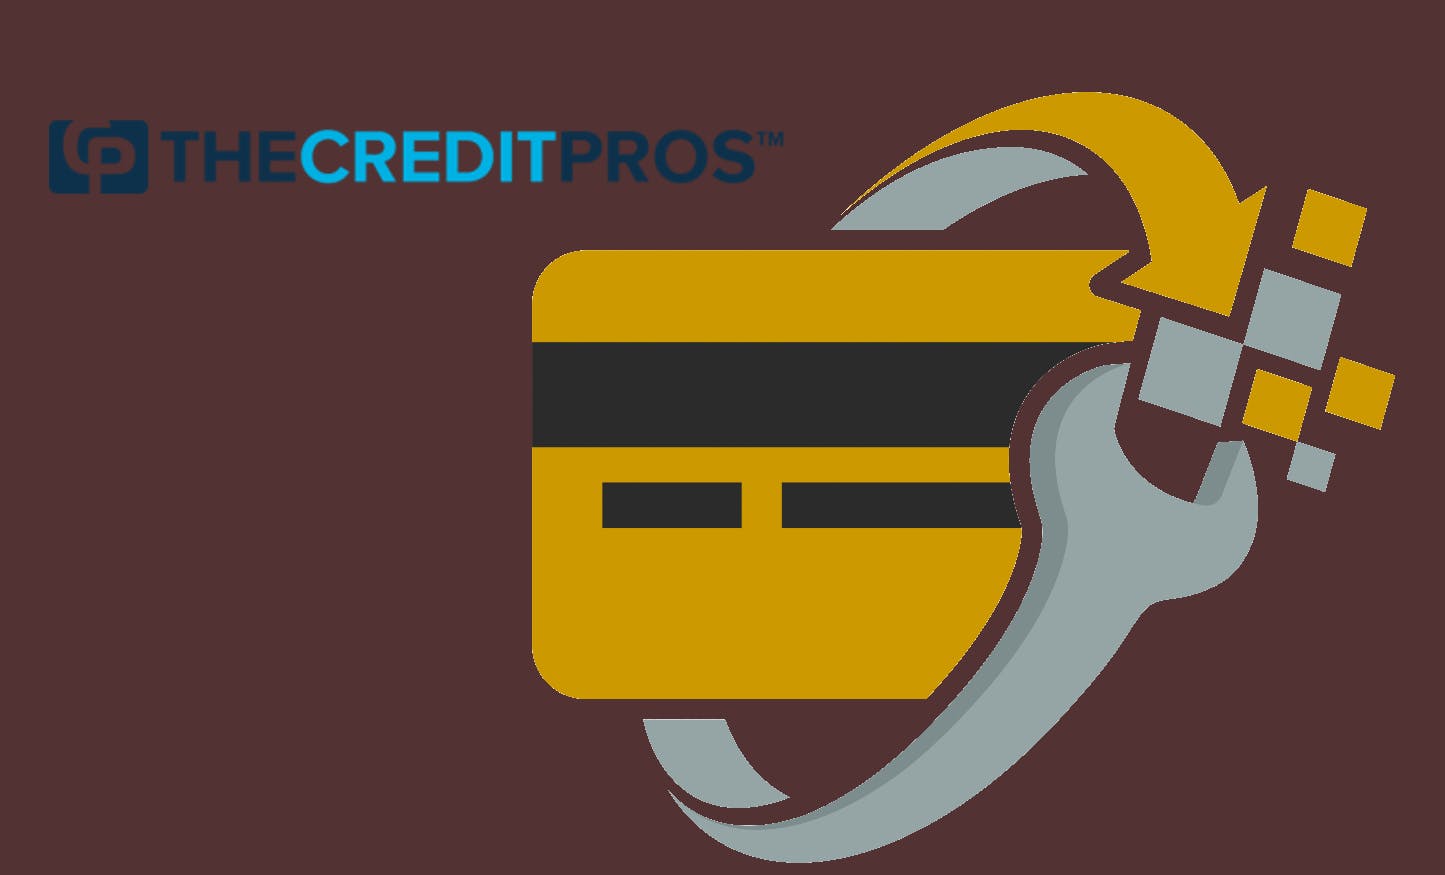 The Credit Pros Full Review: Services, Fees, and Support!